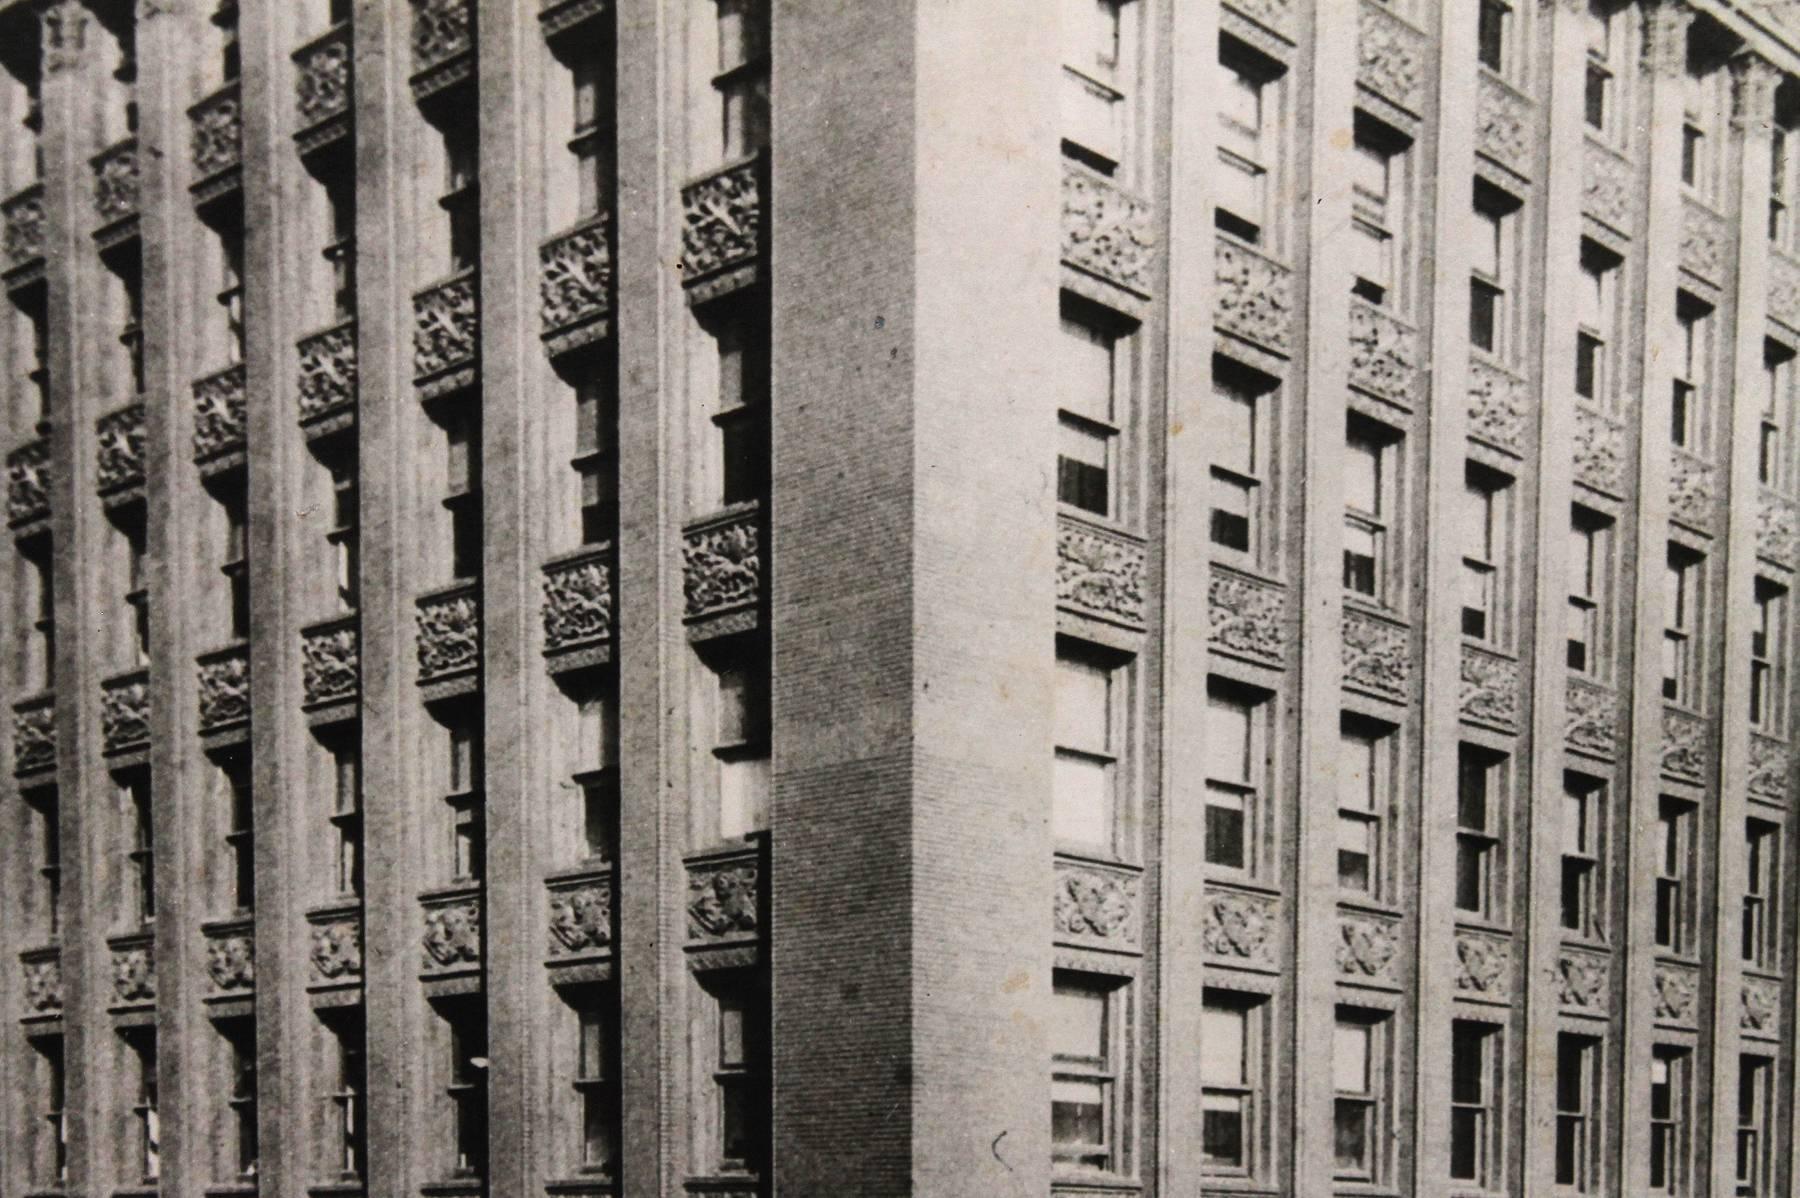 Large Format MOMA Exhibited Photograph of Louis Sullivan's Wainwright Building 1